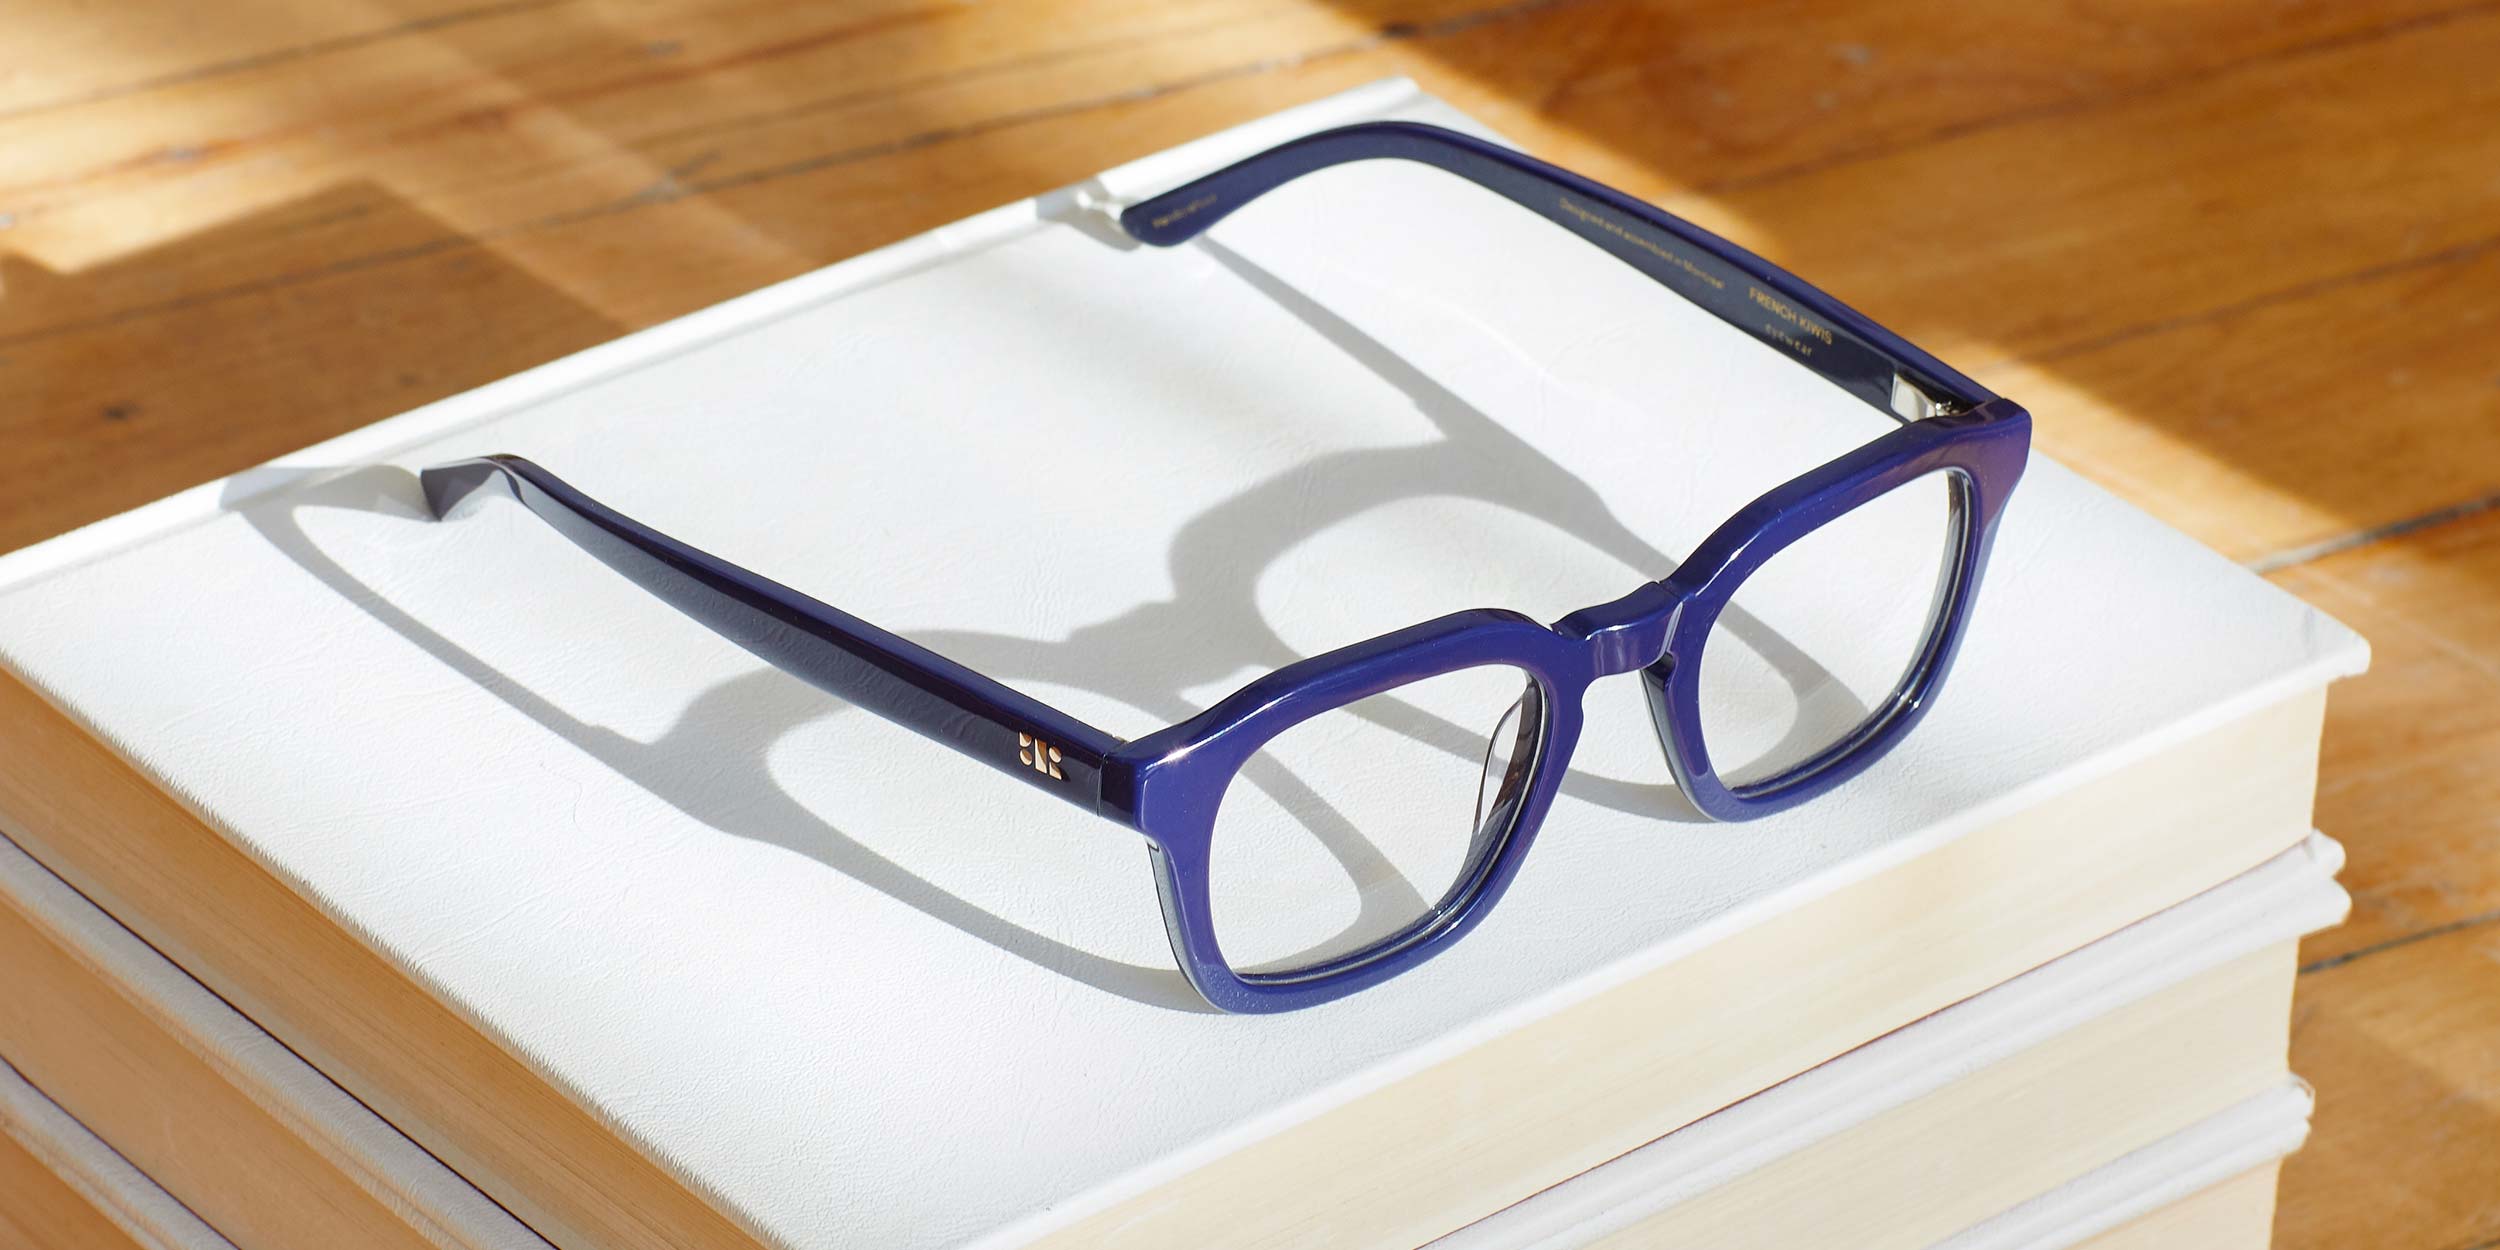 Photo Details of Oscar Grey Marble Reading Glasses in a room